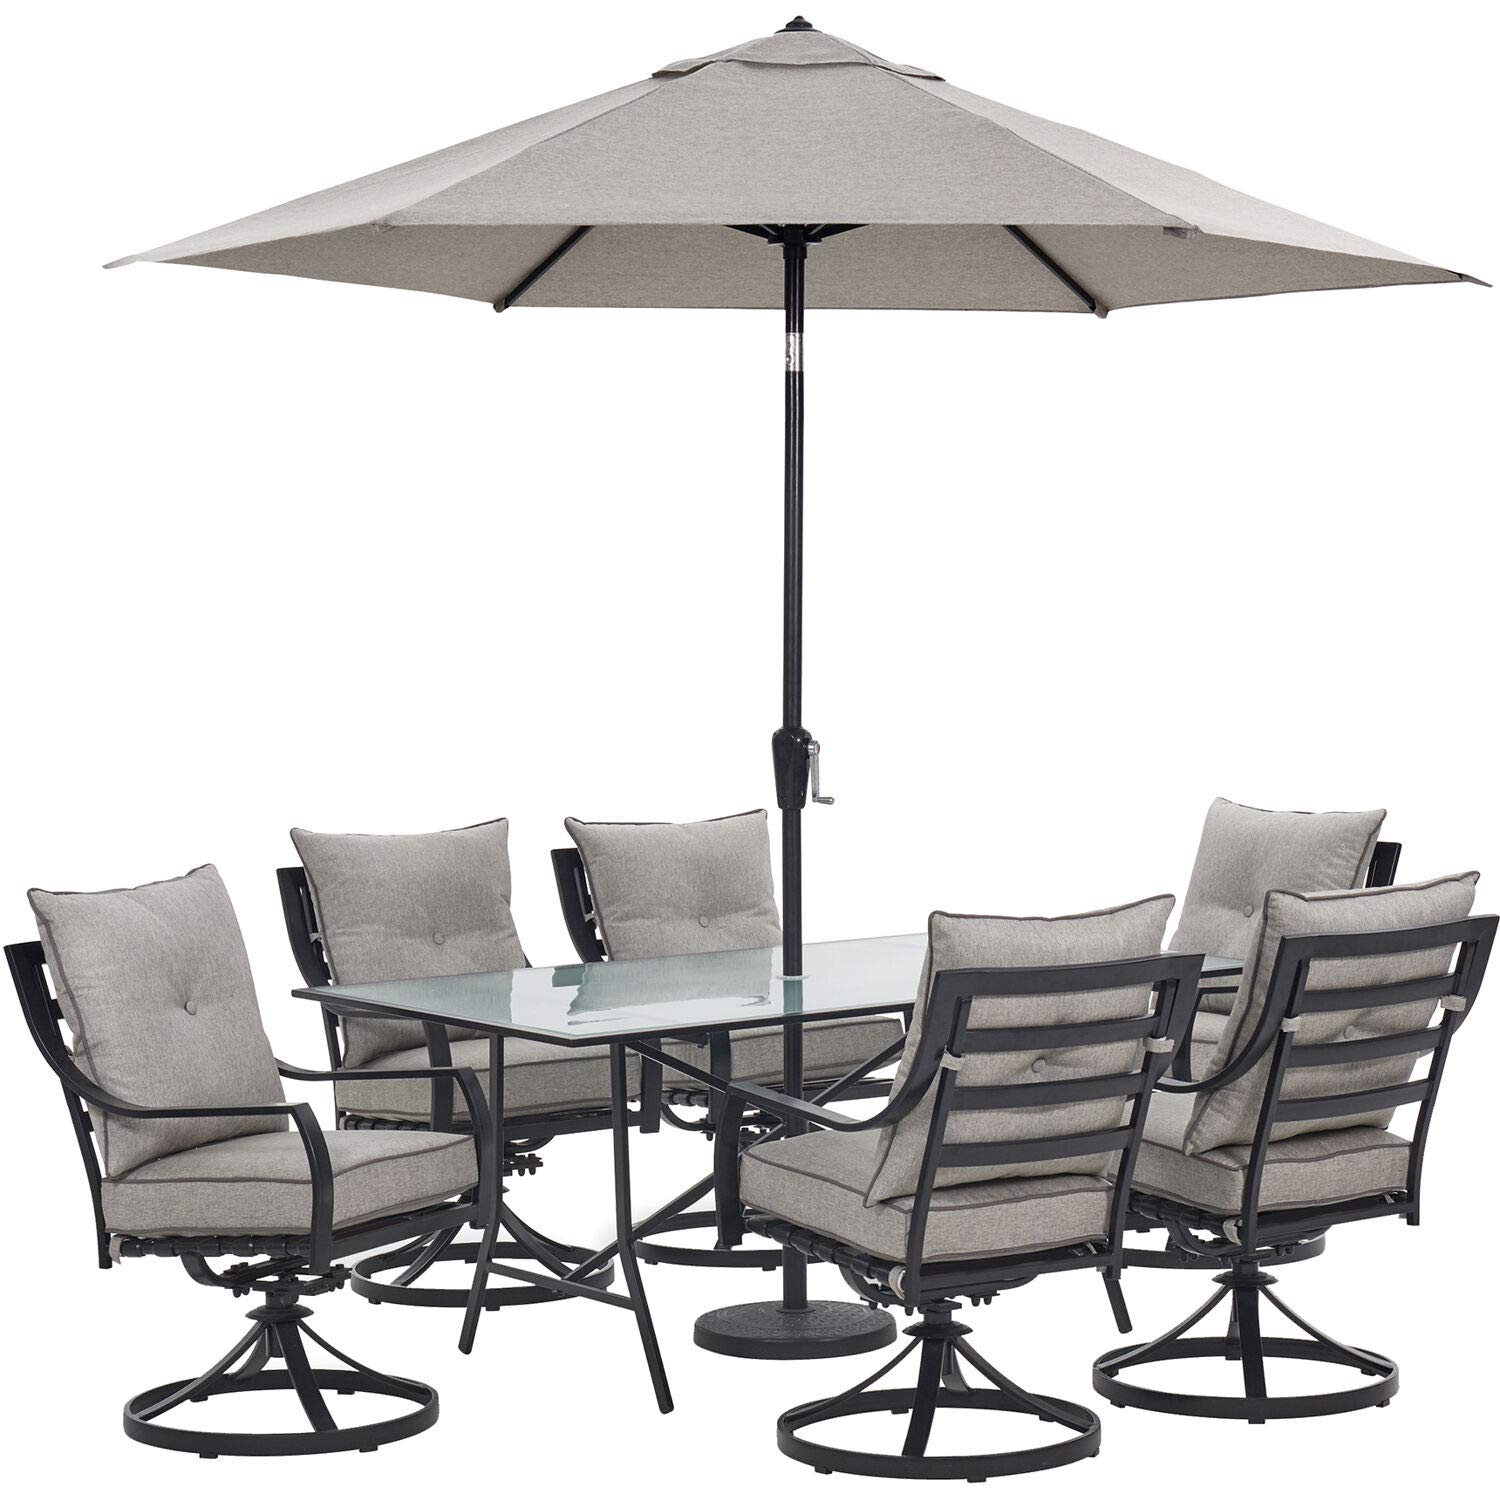 Hanover Lavallette 7-Piece Modern Outdoor Dining Set with Umbrella | 2 Swivel Rockers, 4 Stationary Chairs | 66'' x 38'' Glass-Top Table | Weather, UV Resistant | Silver | LAVDN7PCSW2-SLV-SU